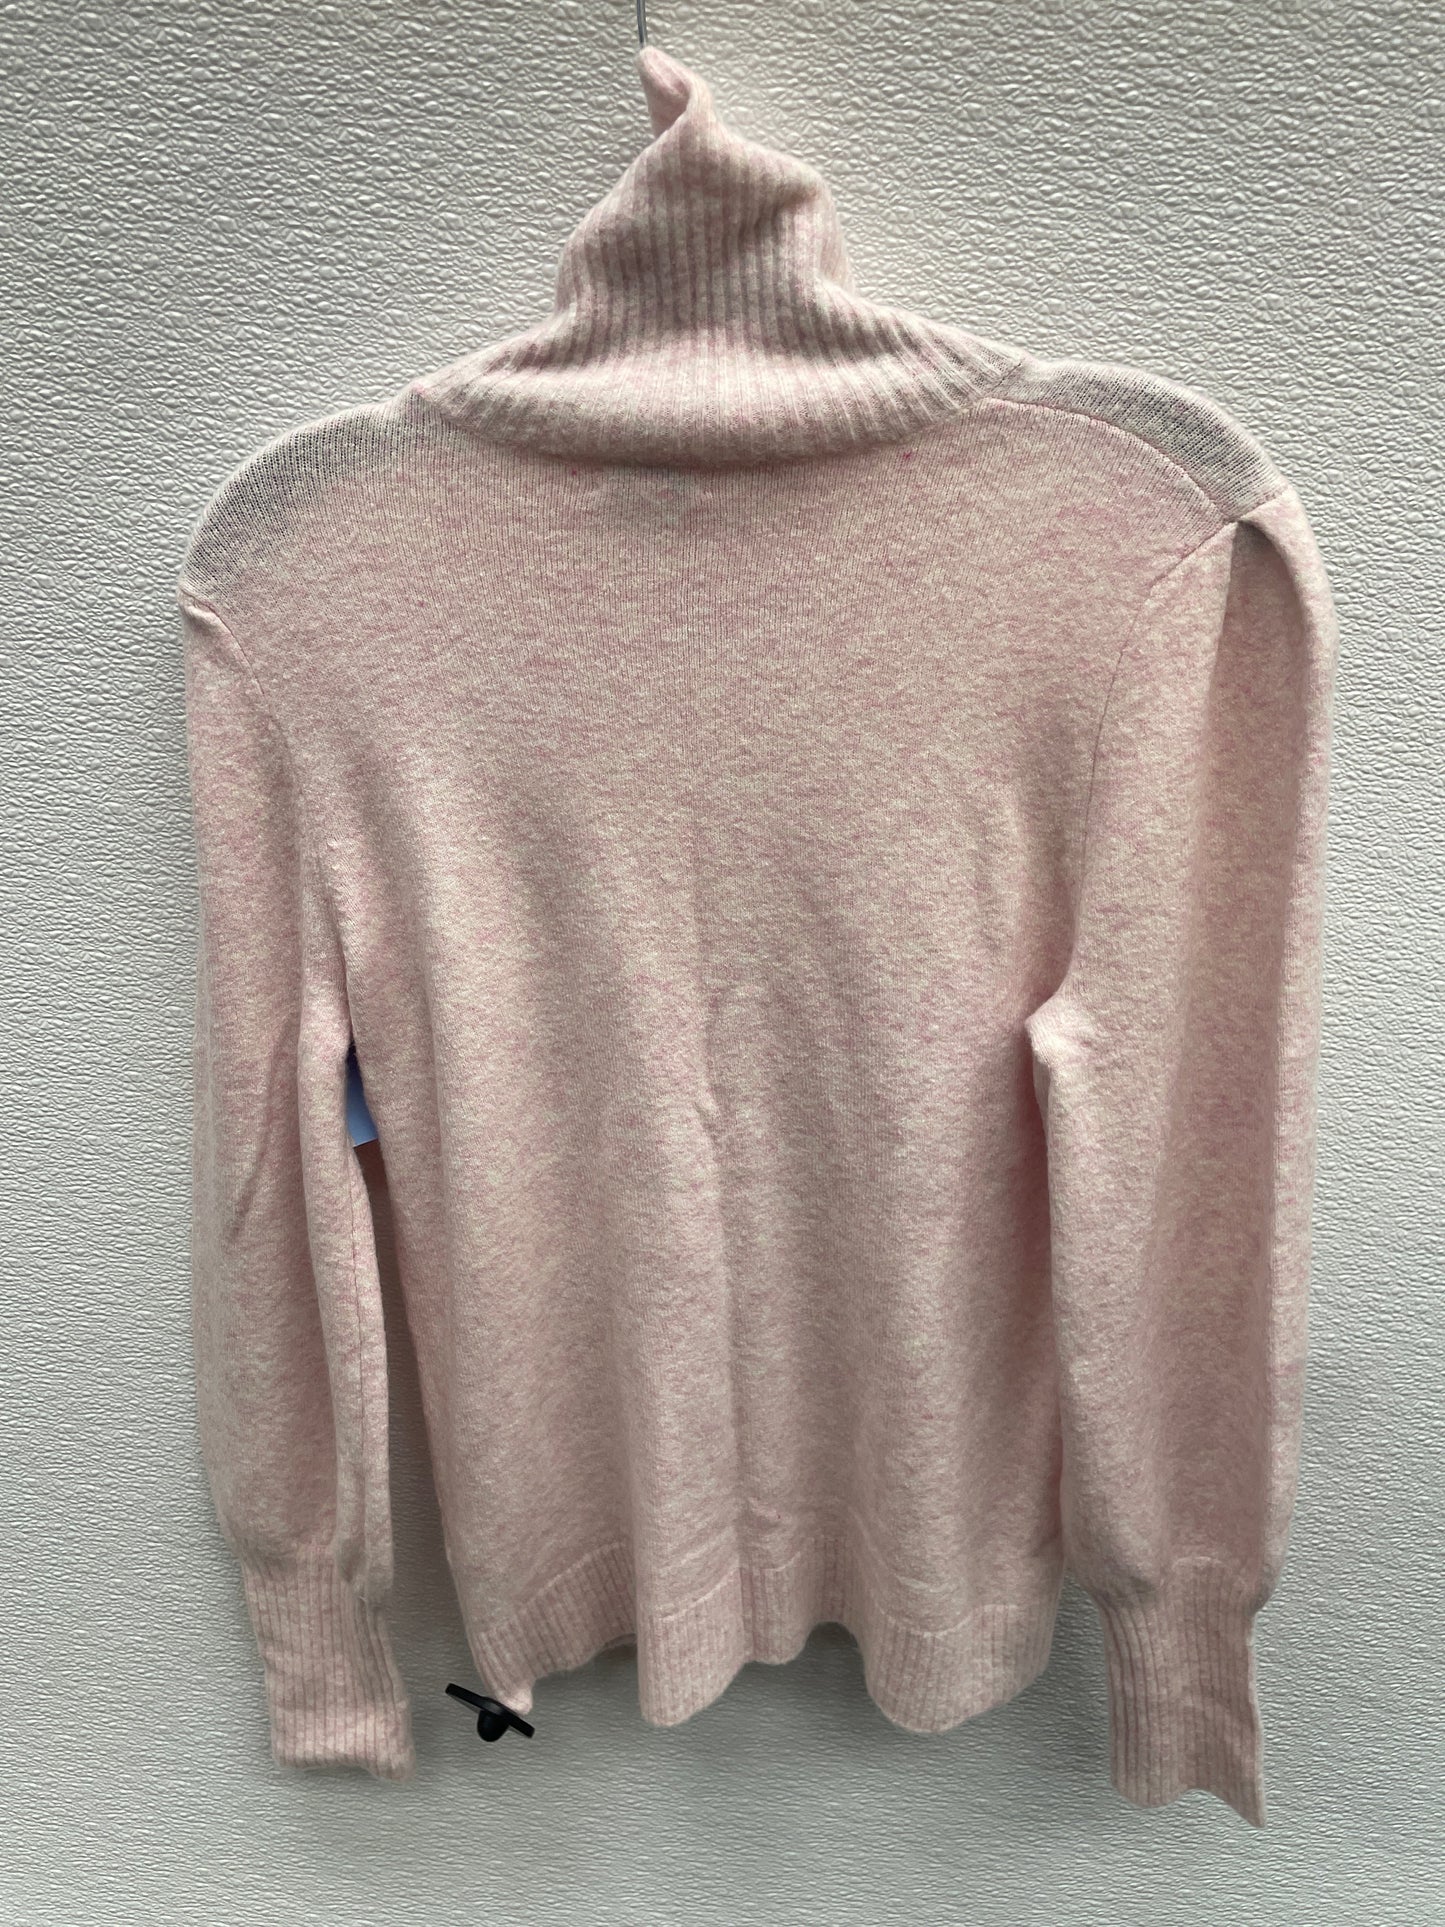 Sweater By J Crew  Size: M